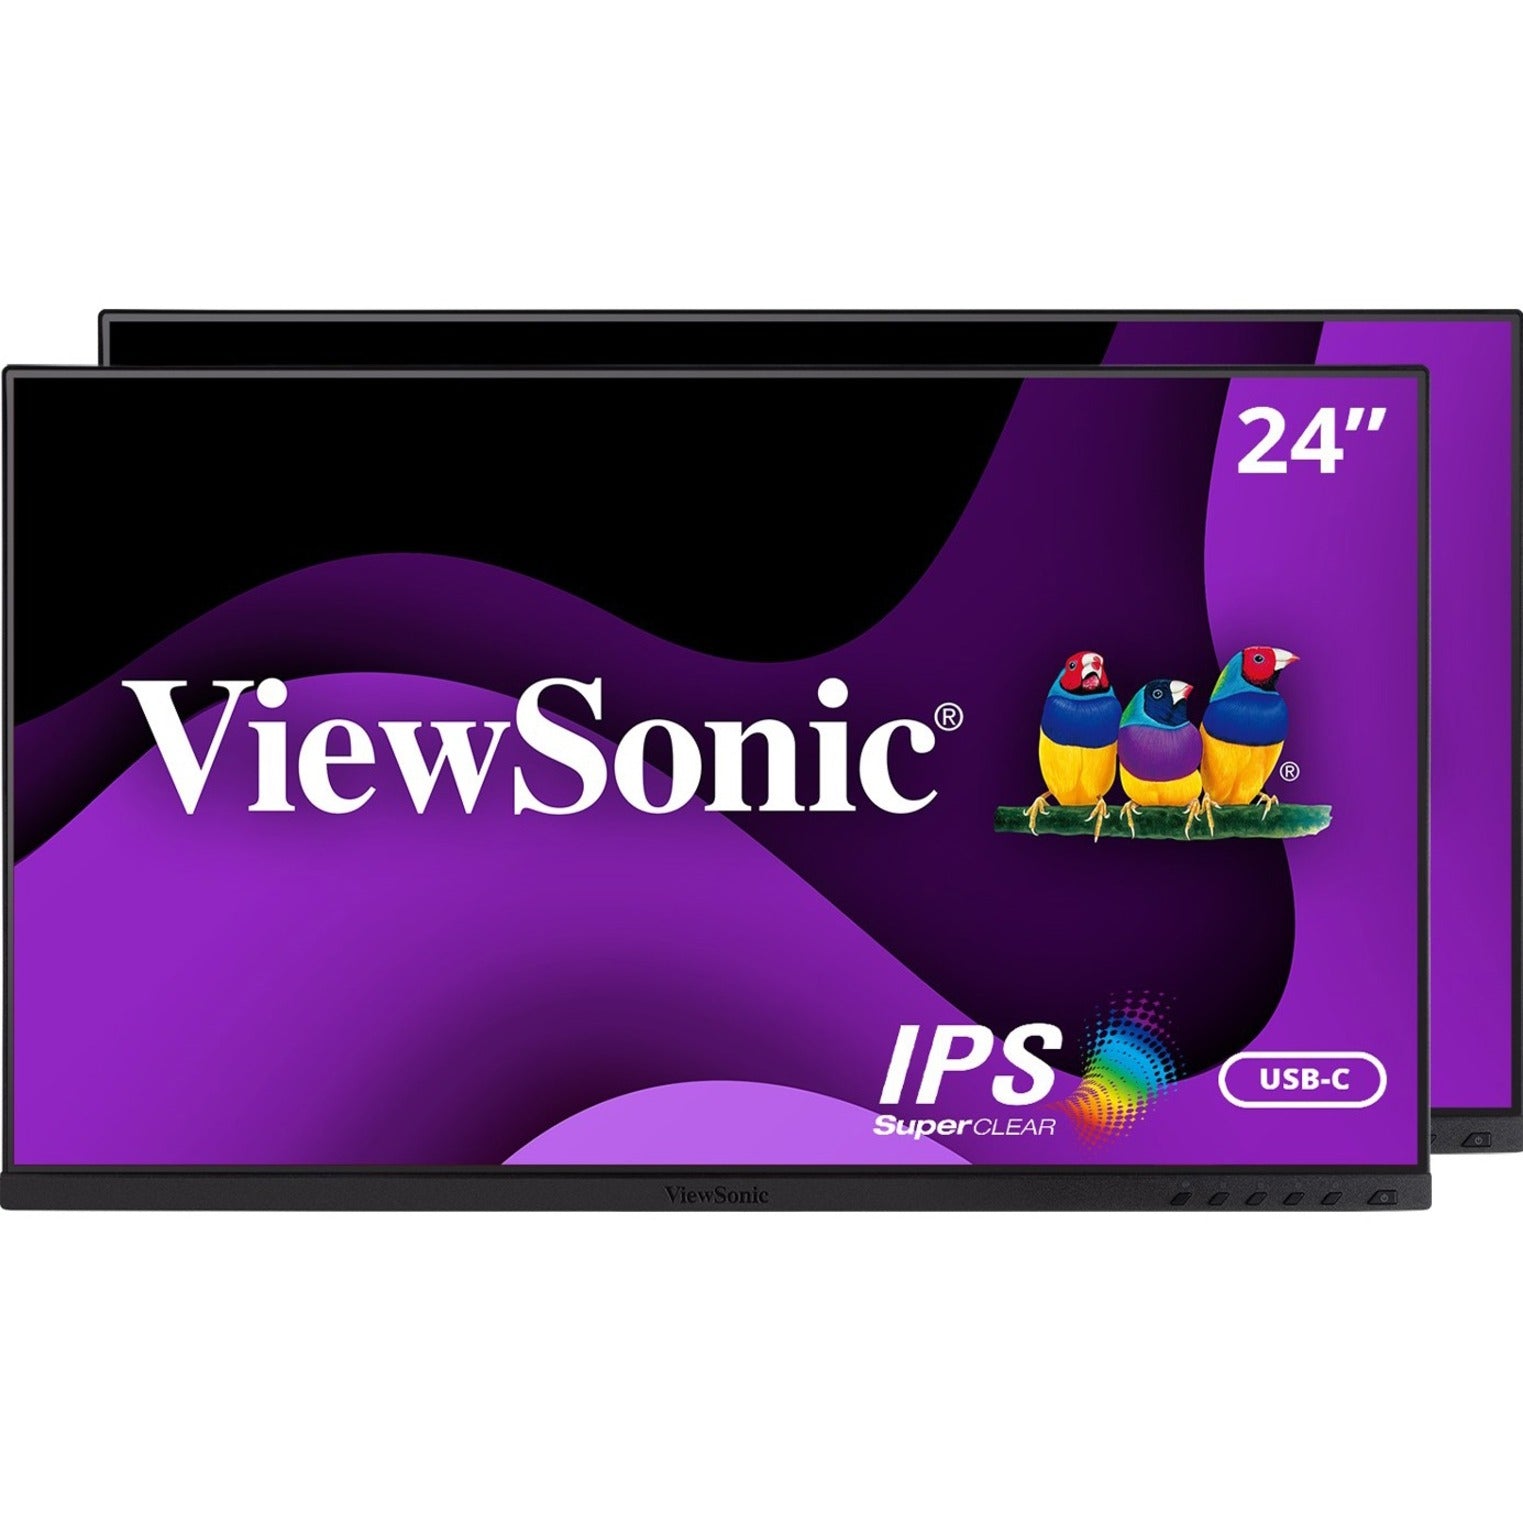 ViewSonic VG2455_56A_H2 24" Dual Pack Head-Only 1080p IPS Monitors, USB C 3.2, 90W Power Delivery, Docking Built-In, HDMI, VGA